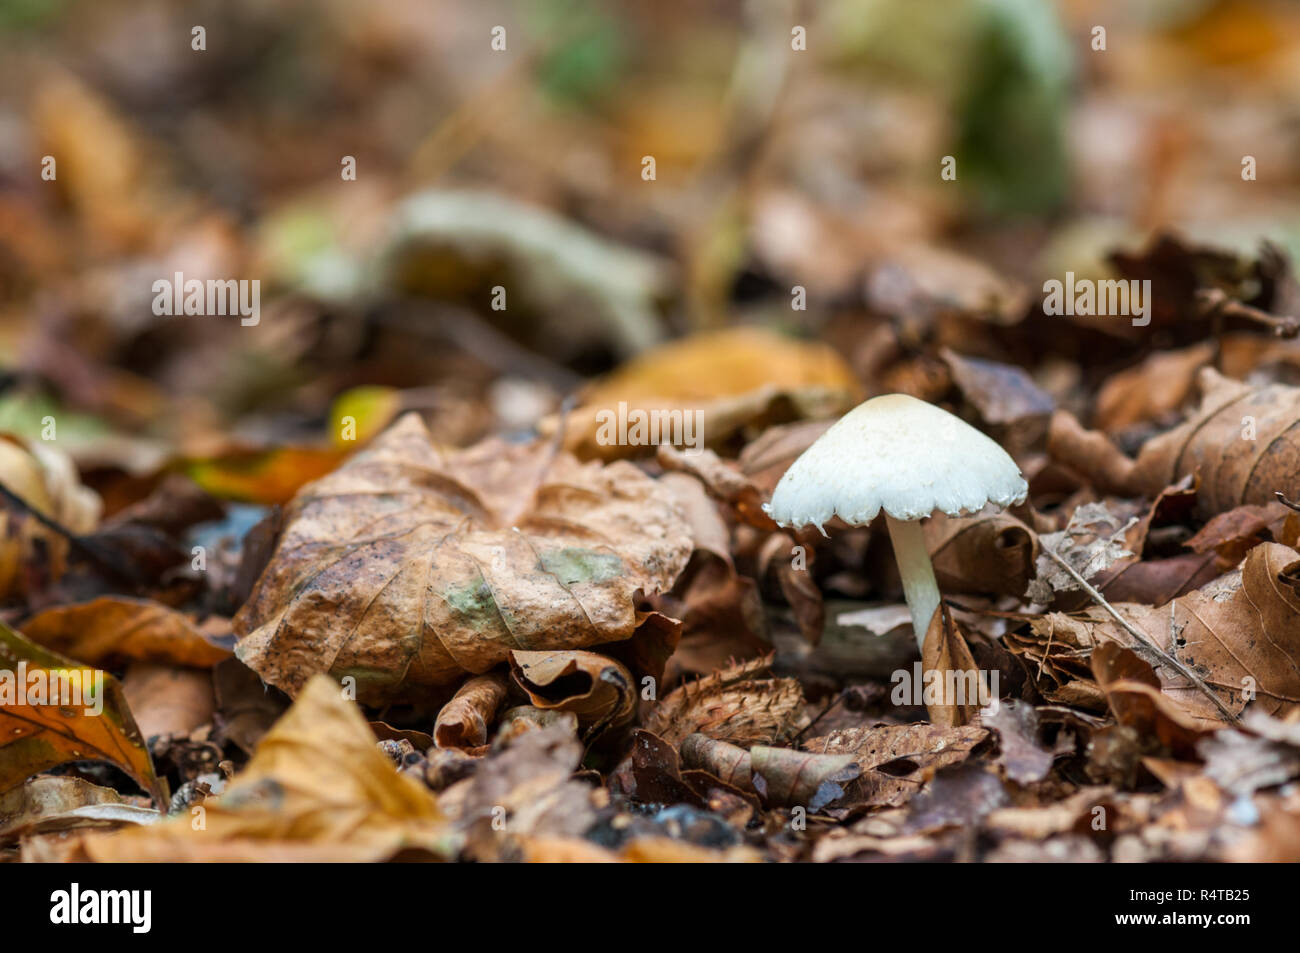 A small white mushroom (inocybe geophylla) is growing between brown fallen leaves in a forest during autumn. Stock Photo